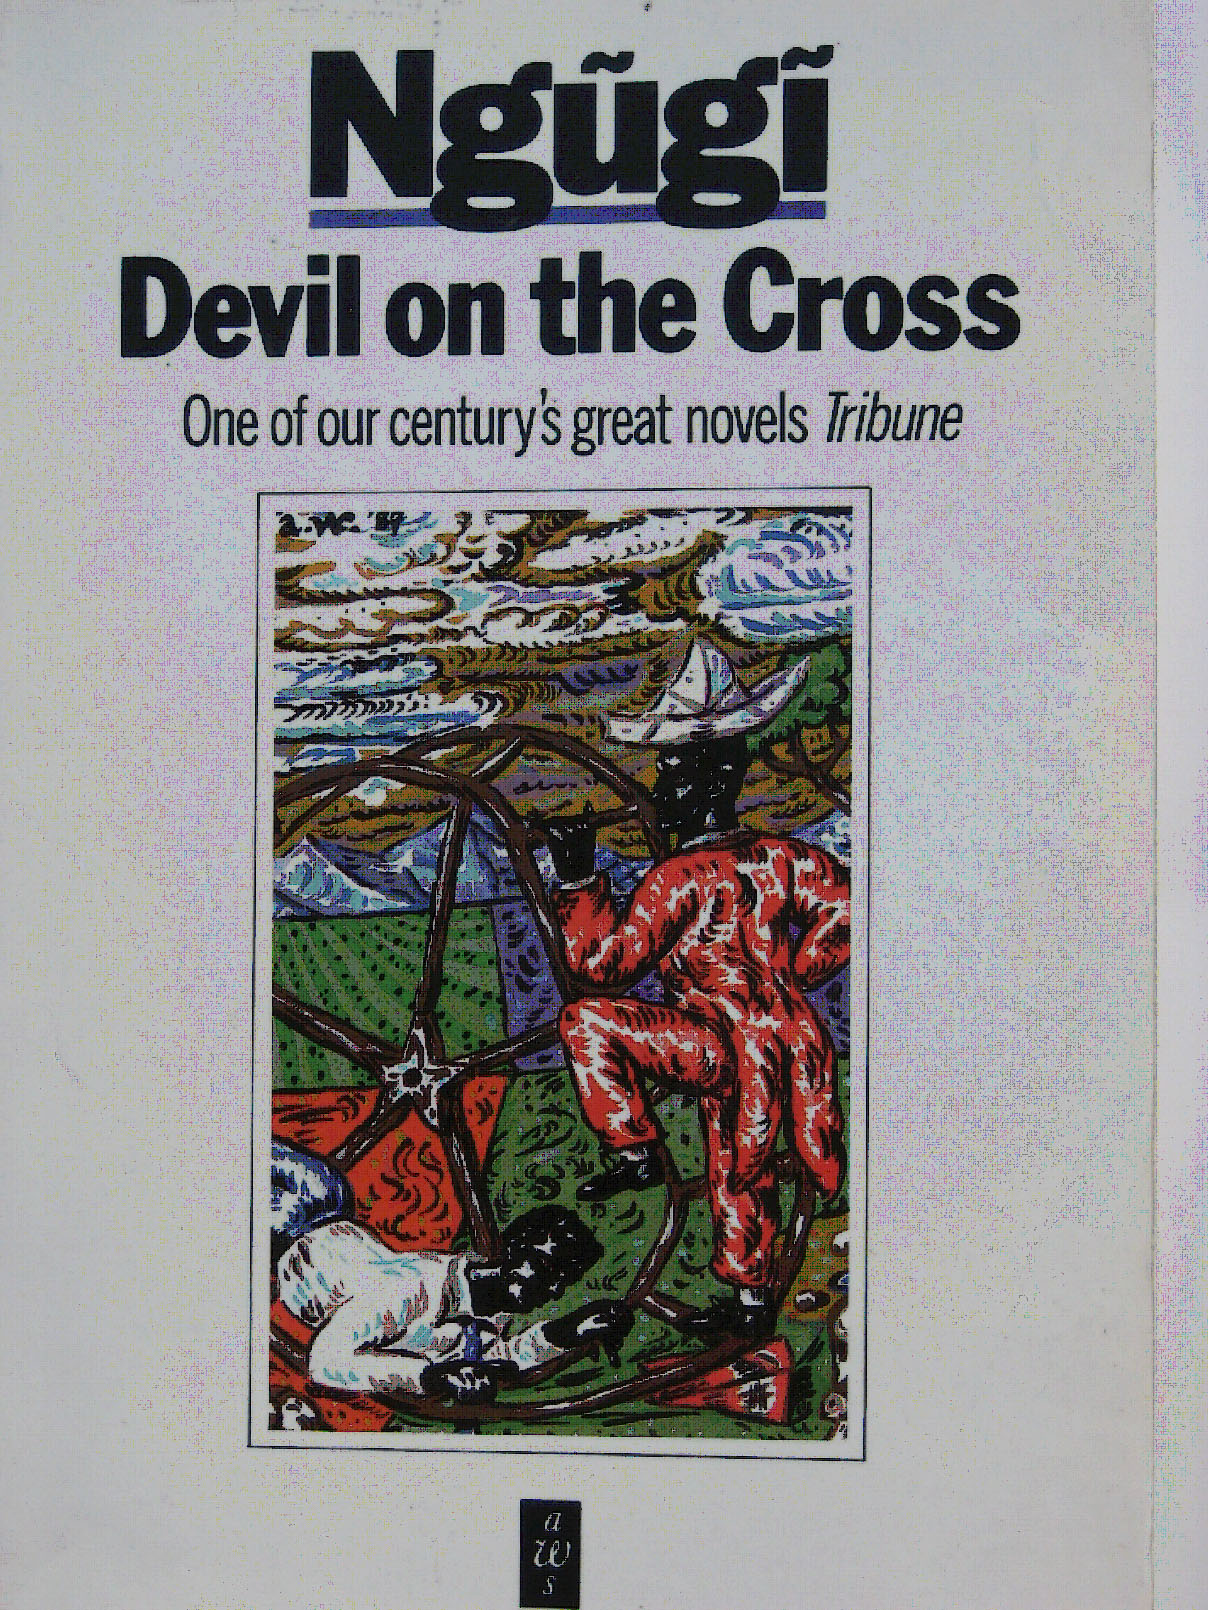 Summary of devil on the cross by ngugi